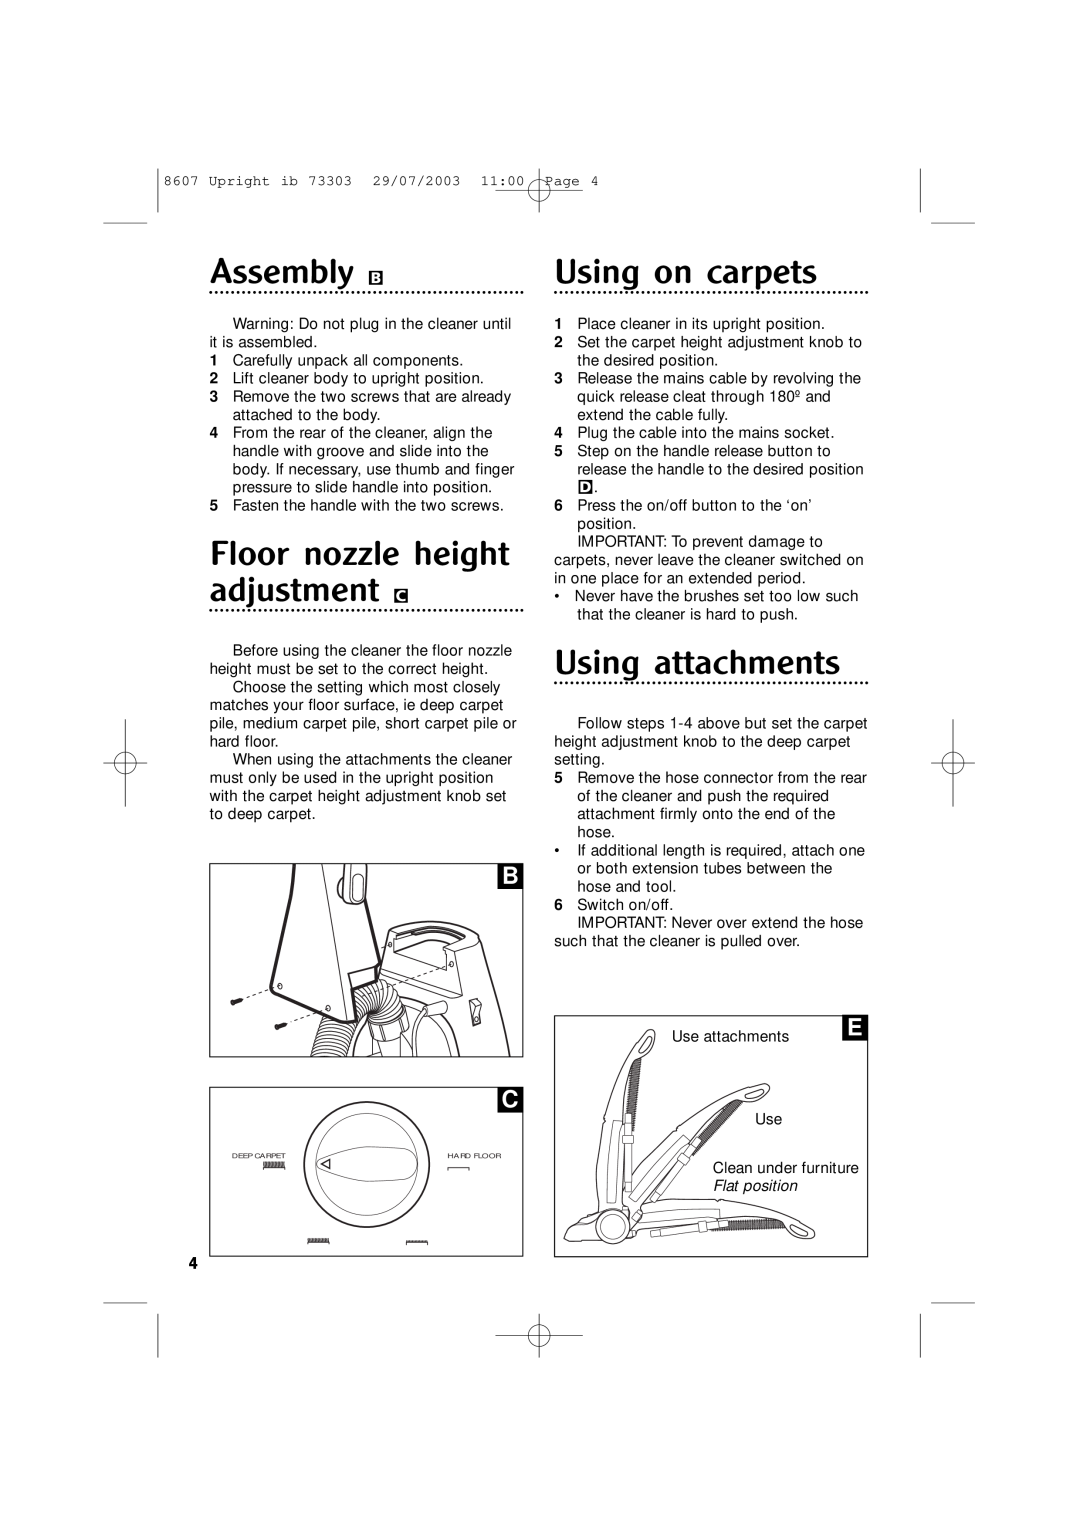 Morphy Richards Ultralight vacuum cleaner Assembly B, Floor nozzle height adjustment C, Using on carpets, Flat position 